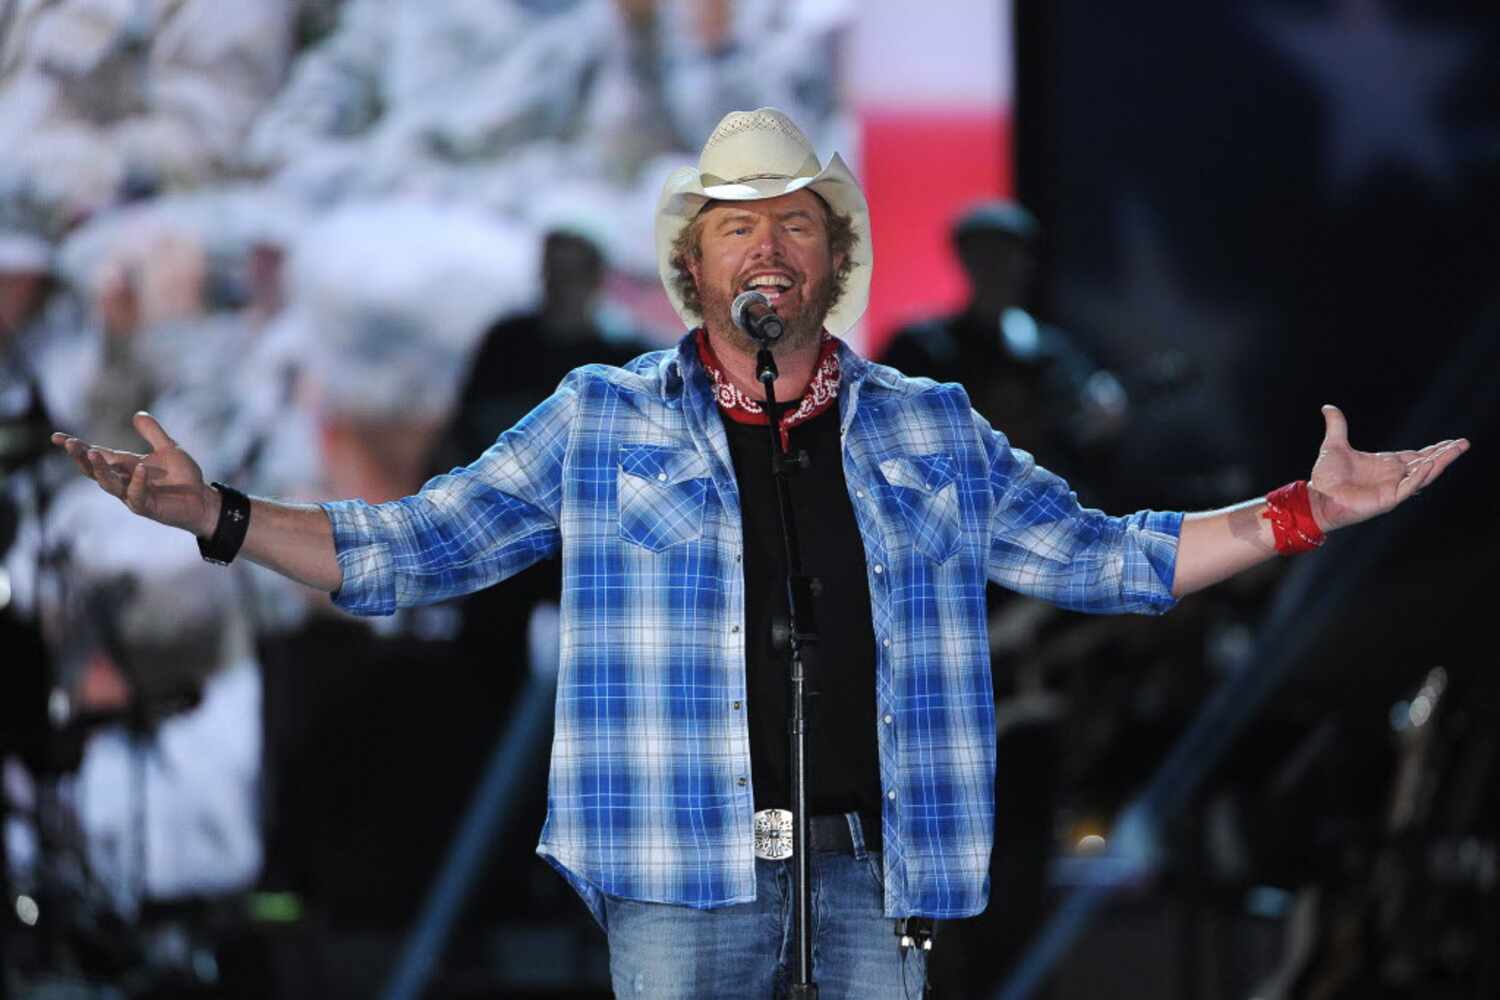 Toby Keith died in February at age 62, following a stomach cancer diagnosis.